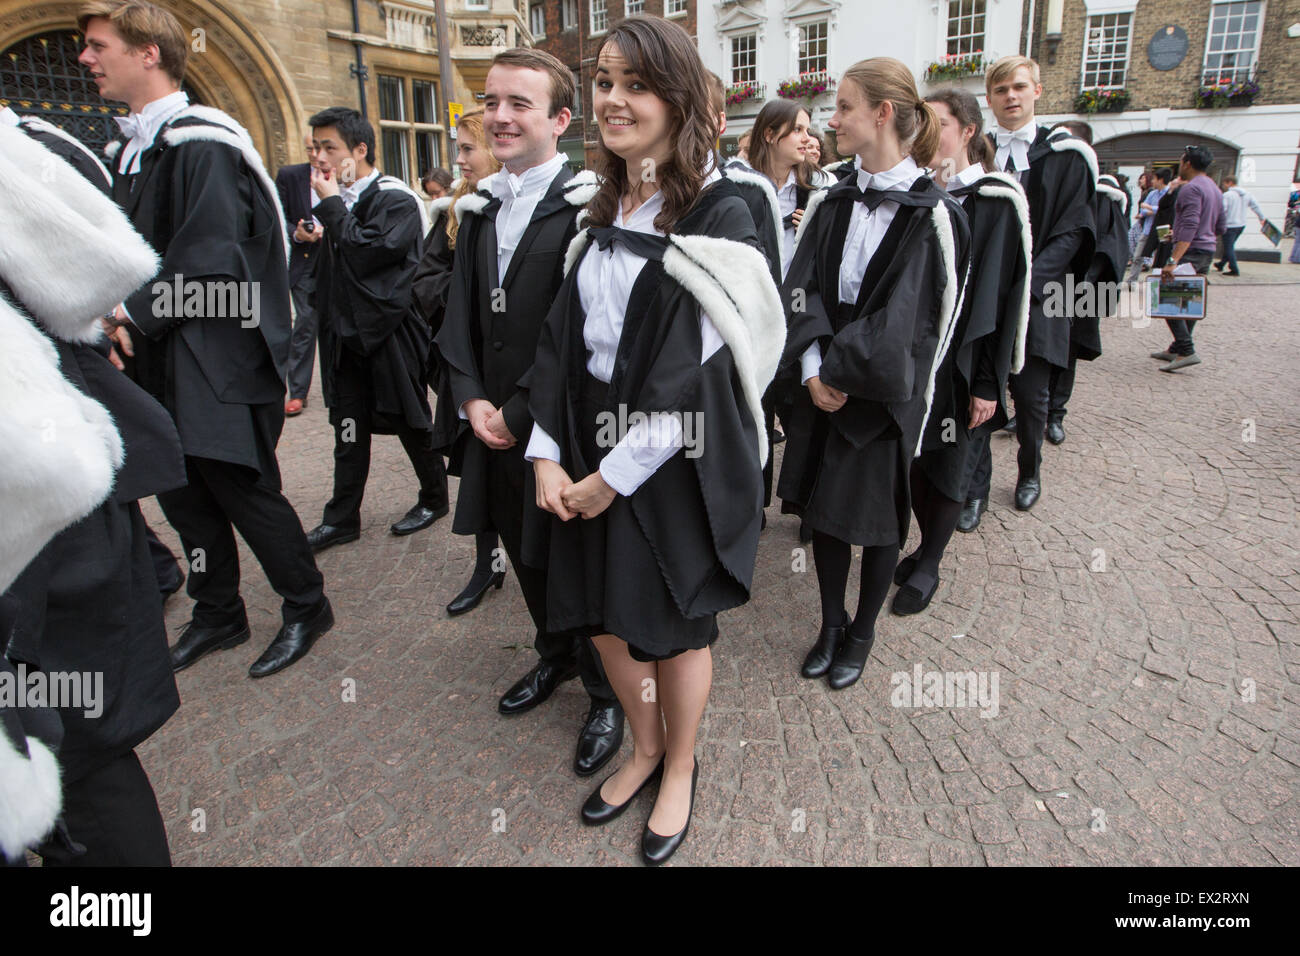 Students from Cambridge University on graduation day after passing ...